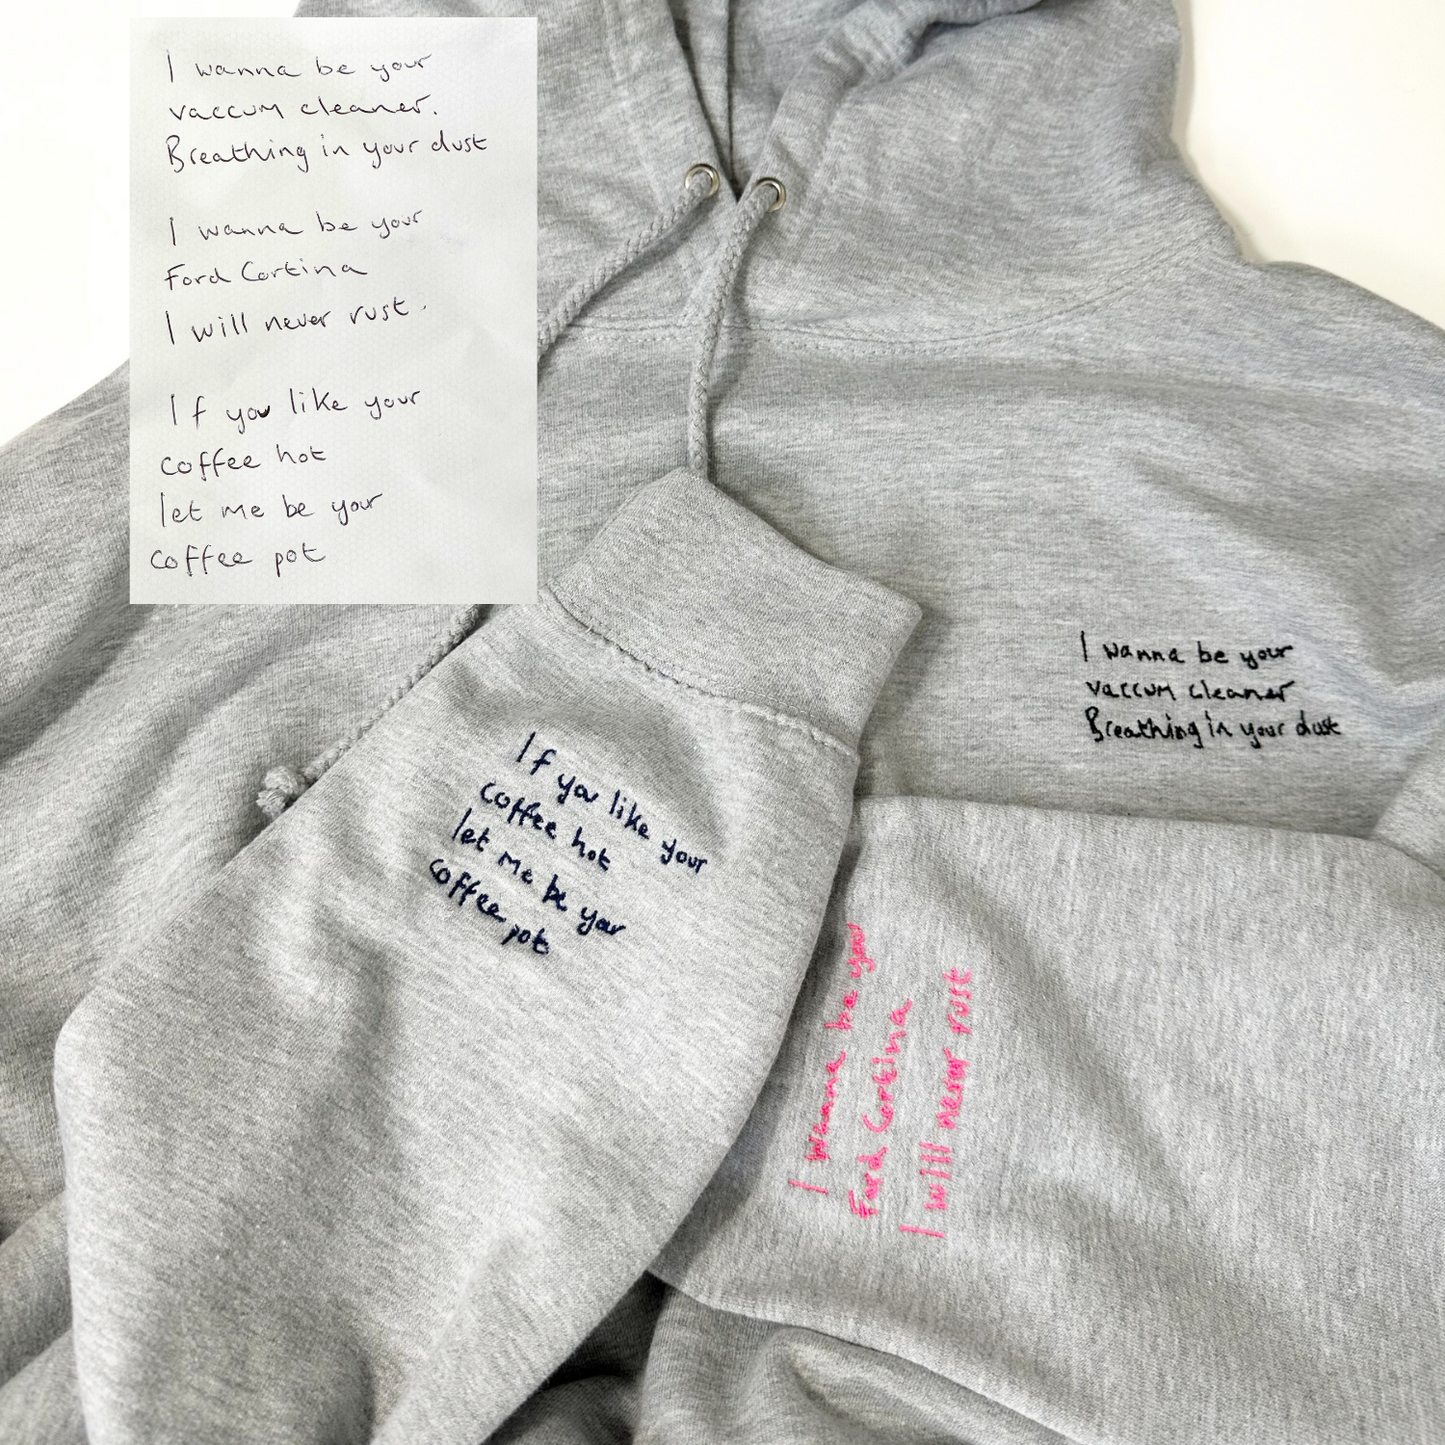 Customised Handwritten Note Embroidered on Sleeve and Breast of High-Quality Message Hoodie - Upload Your Own Image for Personalised Embroidery that means the world t o you